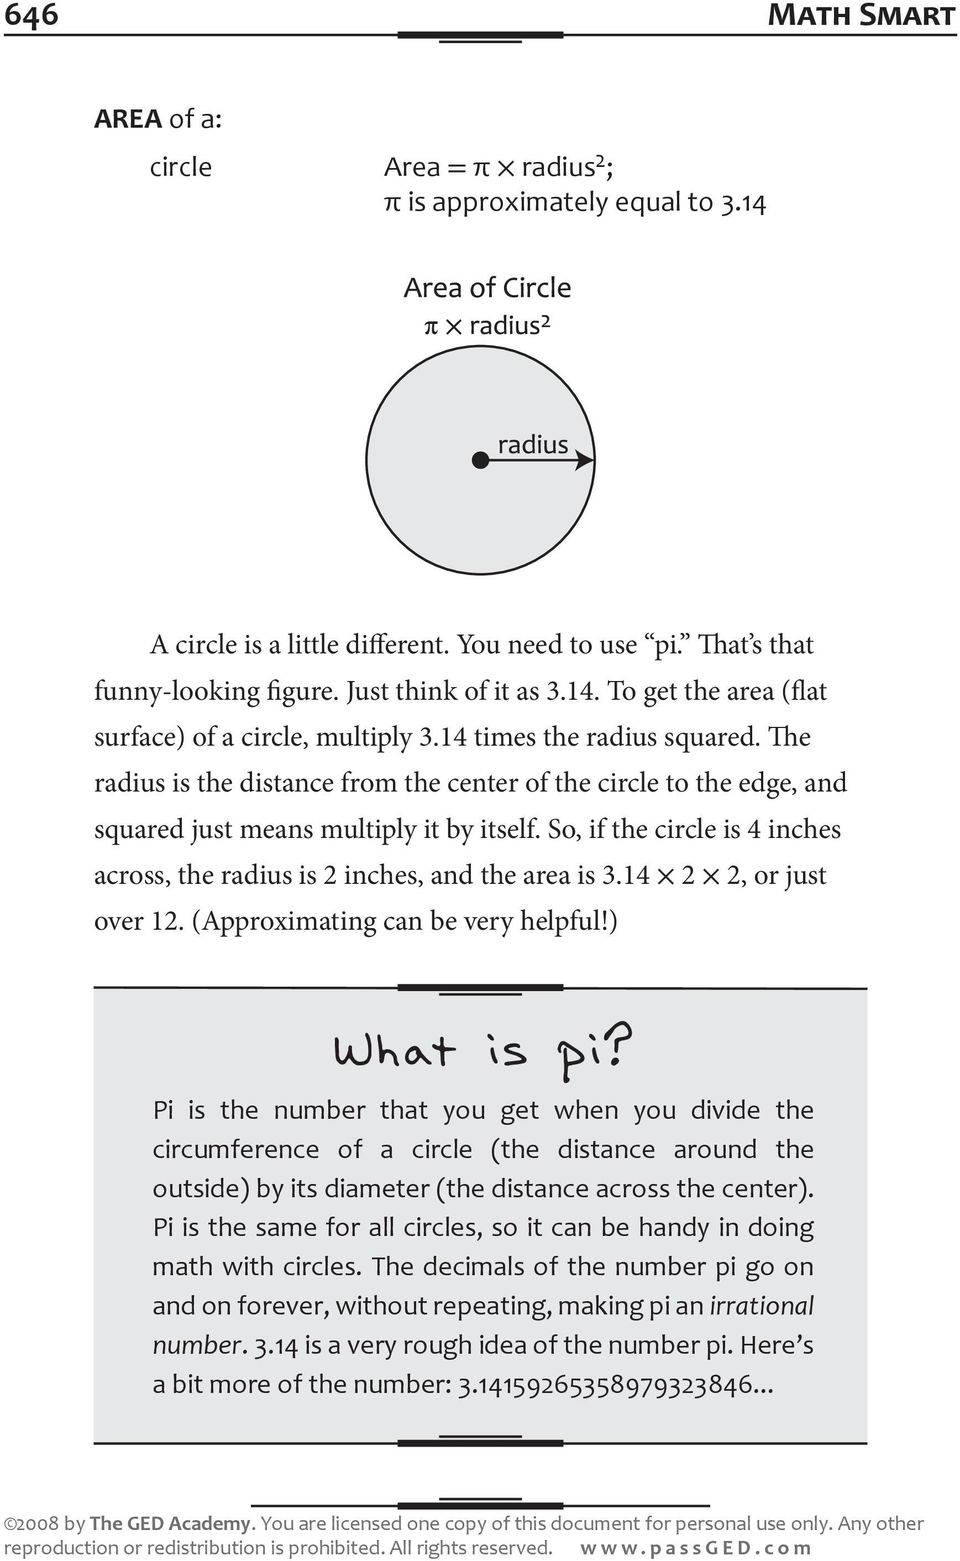 So, if the circle is 4 inches across, the radius is 2 inches, and the area is 3.14 2 2, or just over 12. (Approximating can be very helpful!) What is pi?